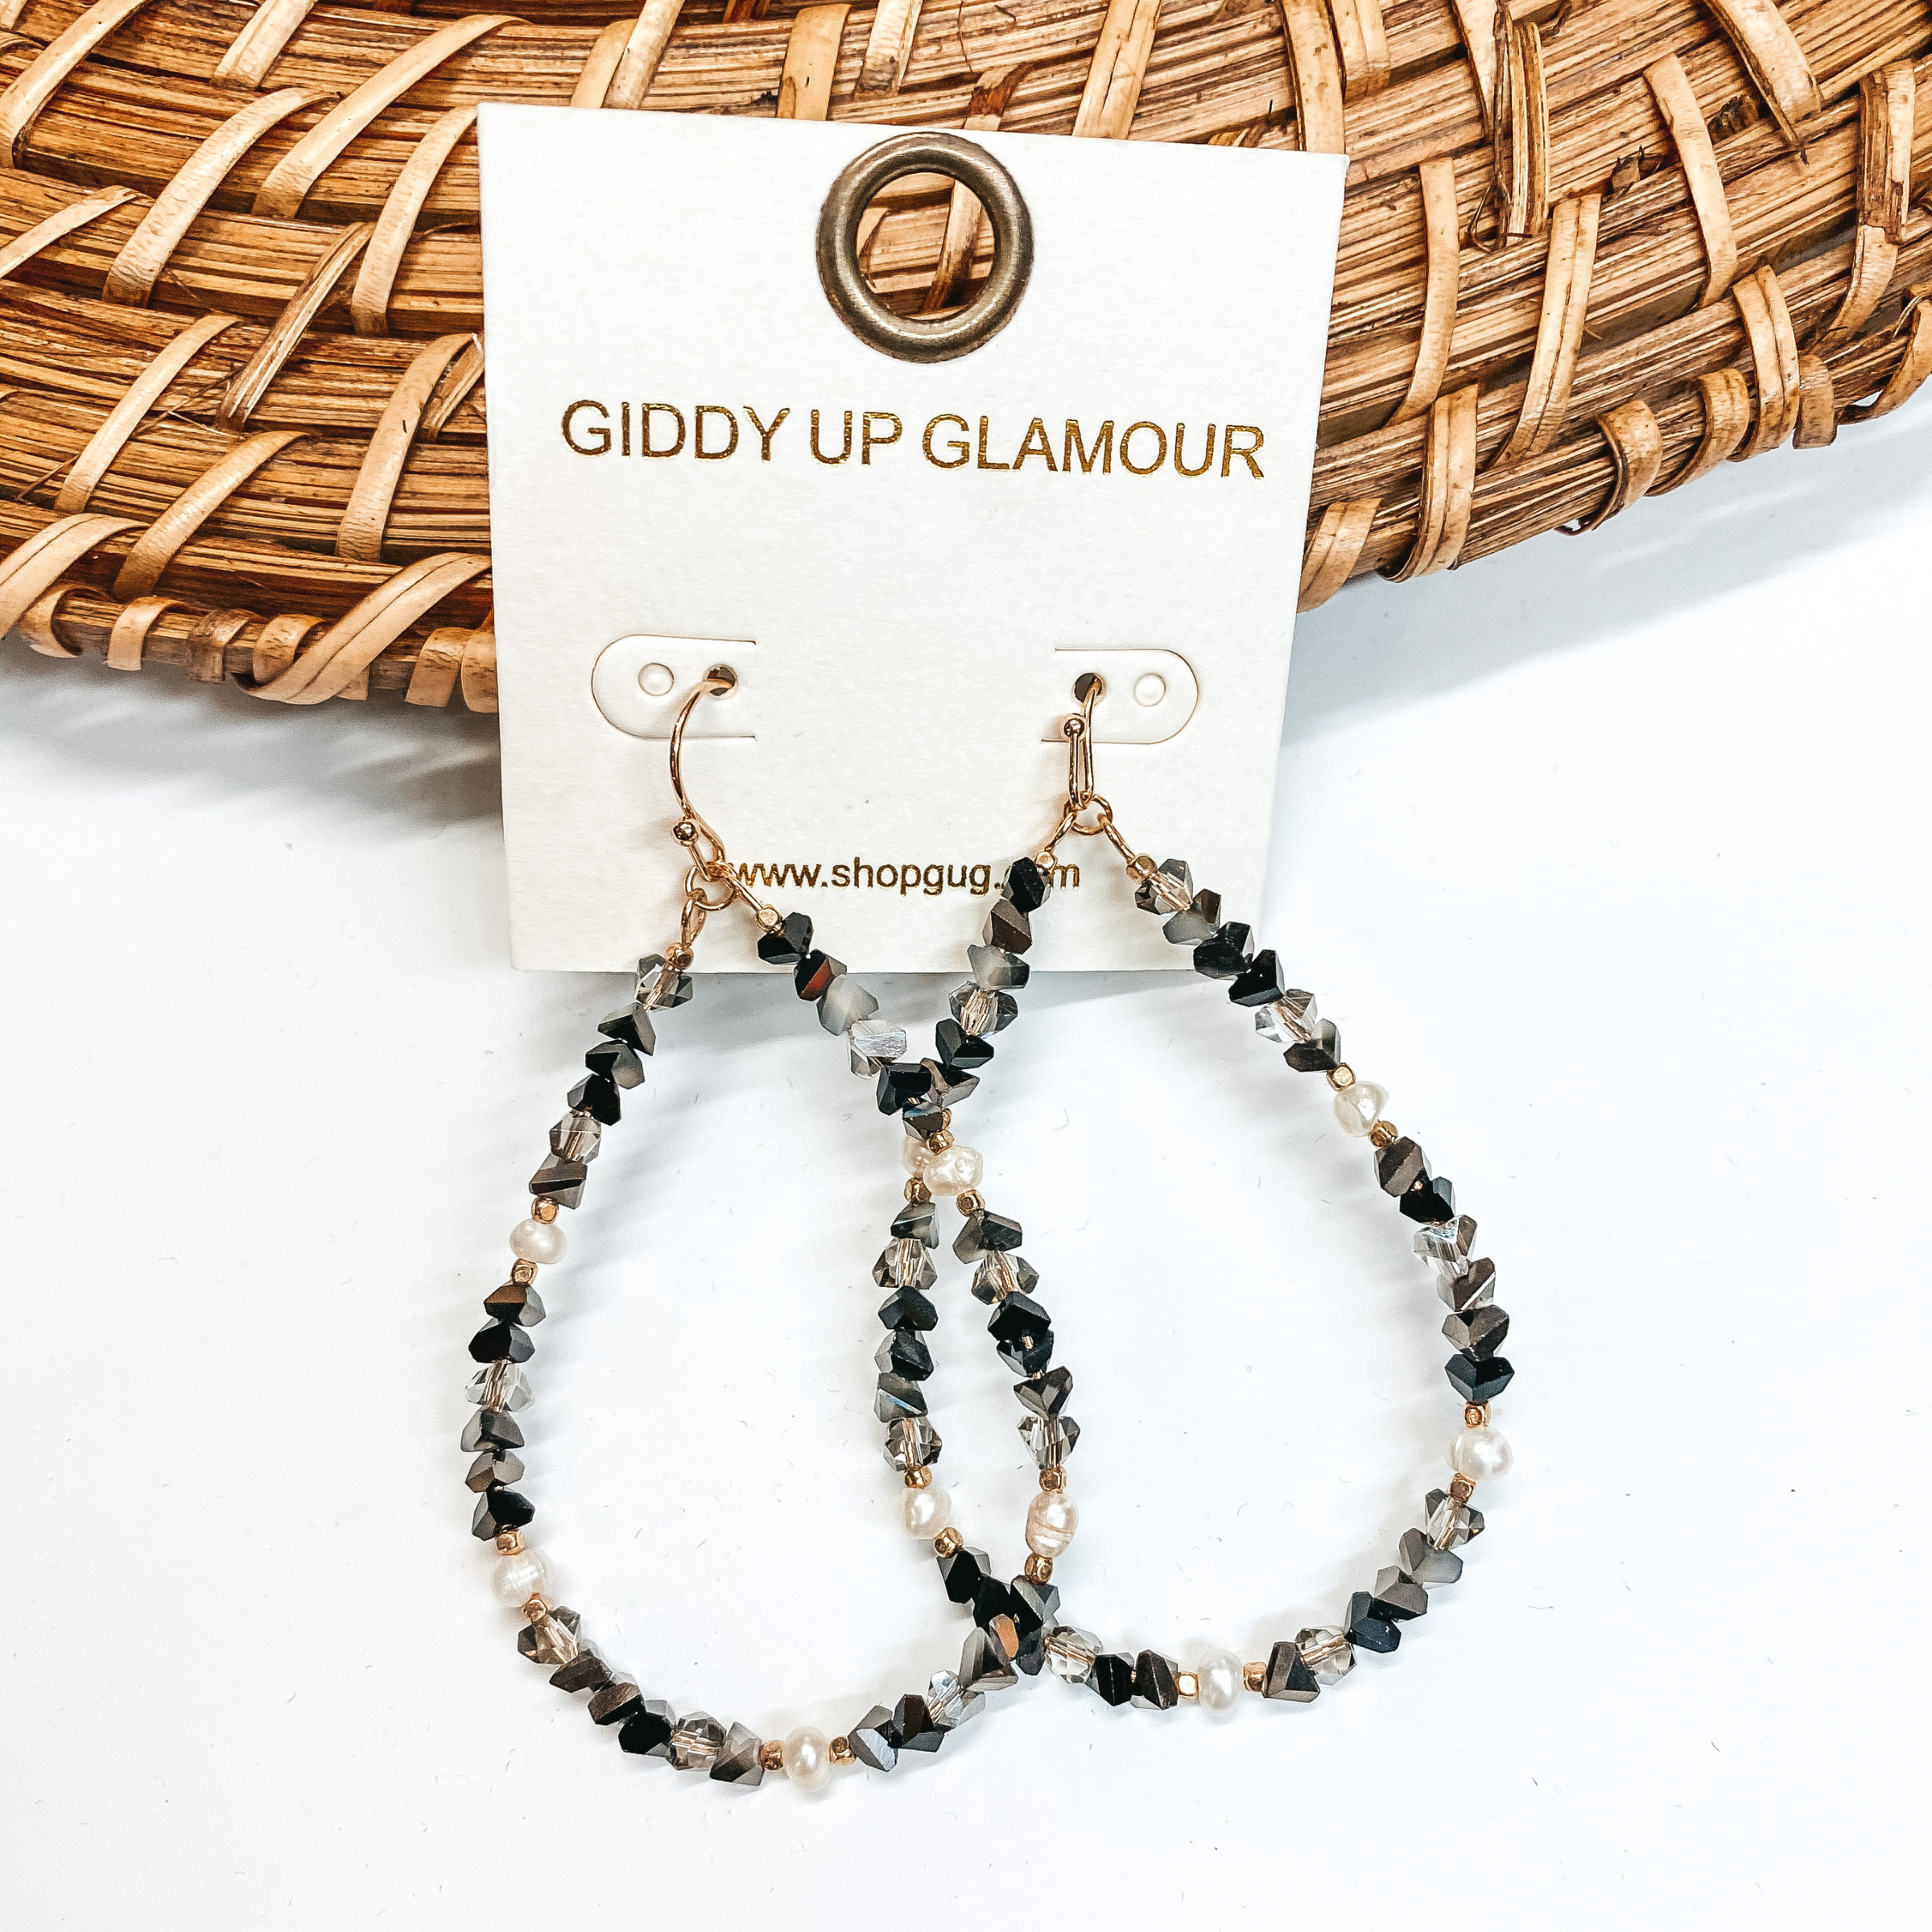 Asymmetrical Crystal Beaded Teardrop Earrings with Pearl Detail in Black and Grey - Giddy Up Glamour Boutique